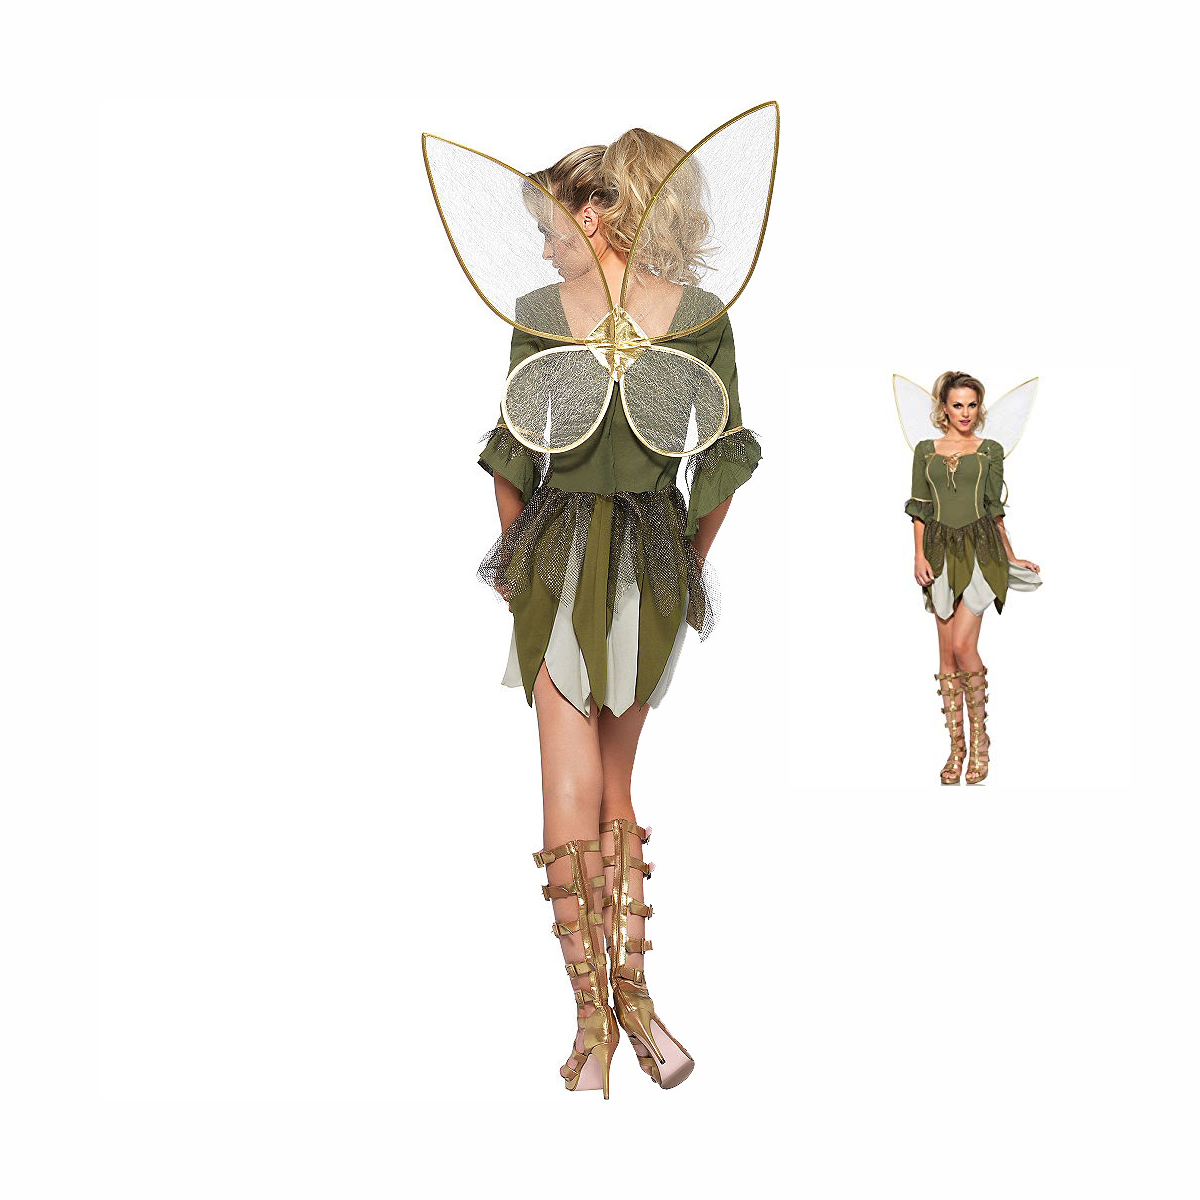 Disney Tinkerbell Costume - Adult Tinkerbell Fairy Halloween Costumes for S...